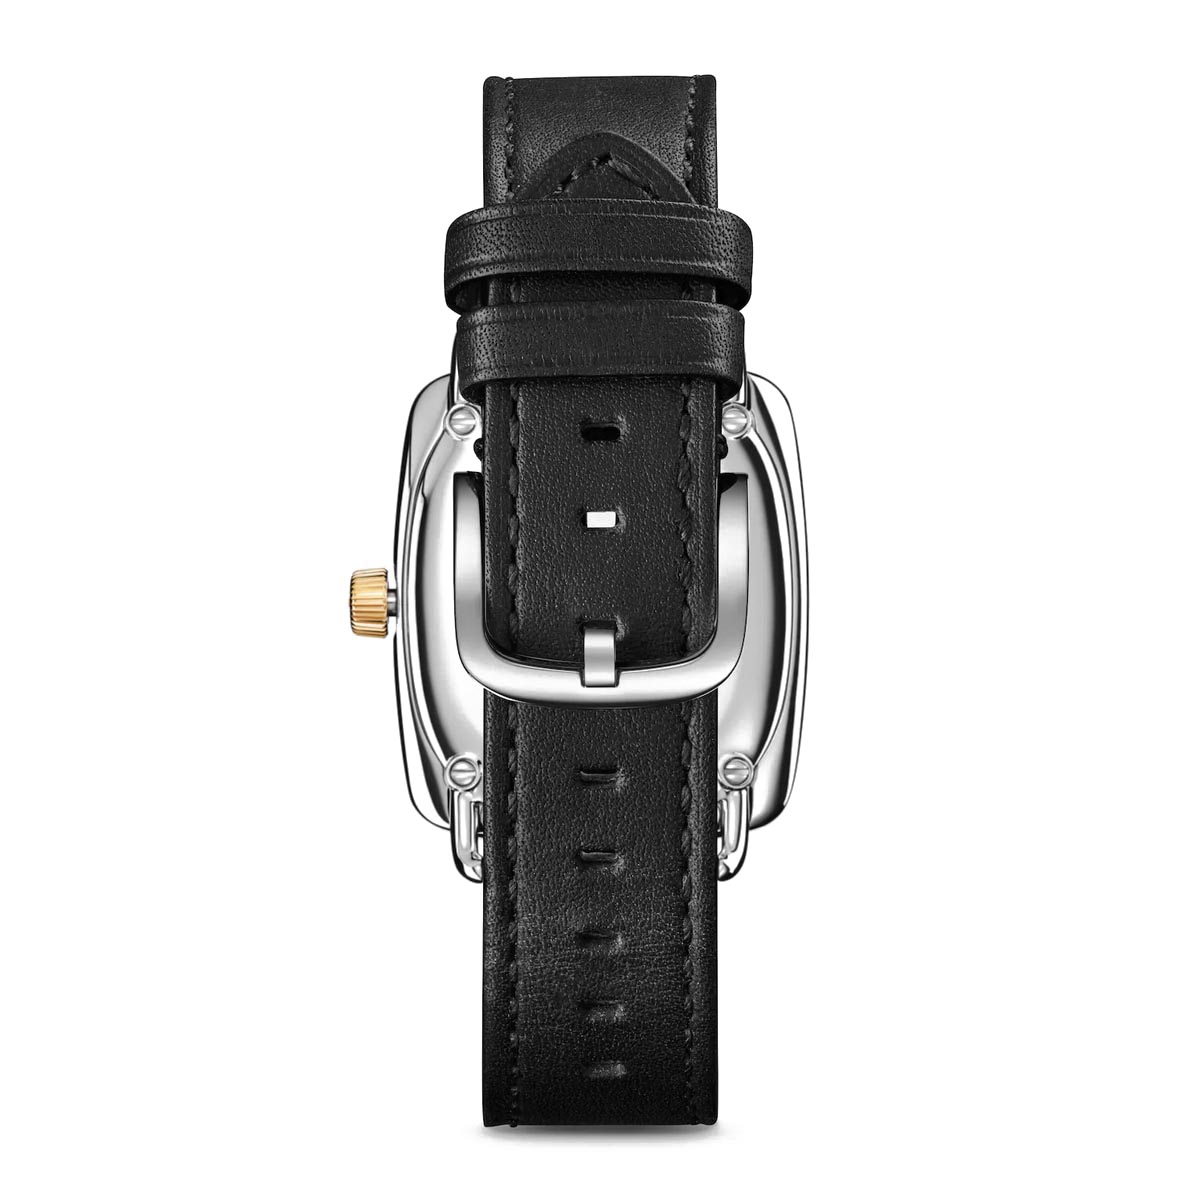 Shinola Bixby Womens Watch with White Dial and Black Leather Strap (quartz movement)